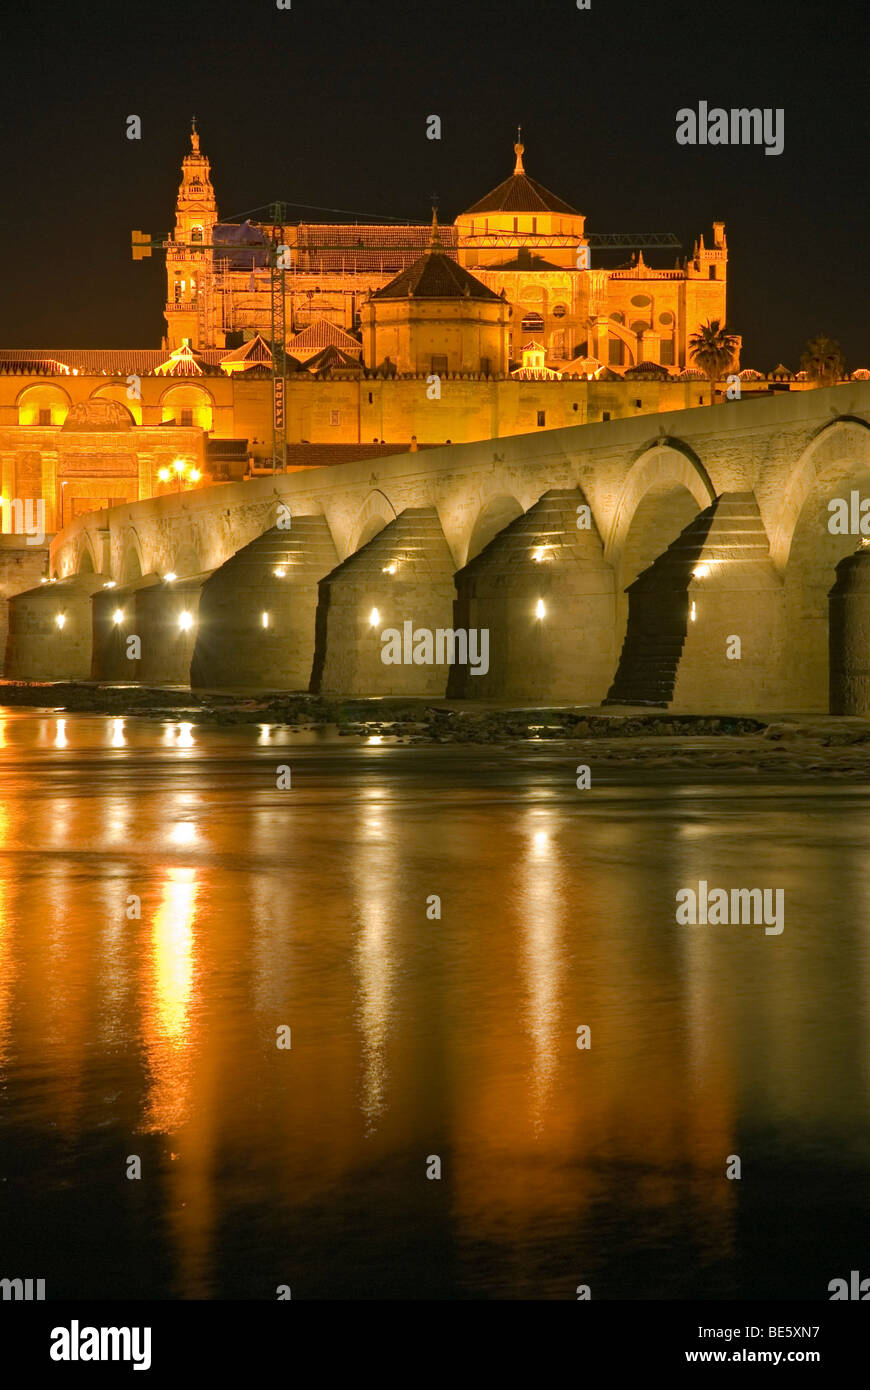 The artificially illuminated Puente Romano crossing the Guadalquivir river with the Mezquita at back, Cordoba, Andalusia, Spain Stock Photo